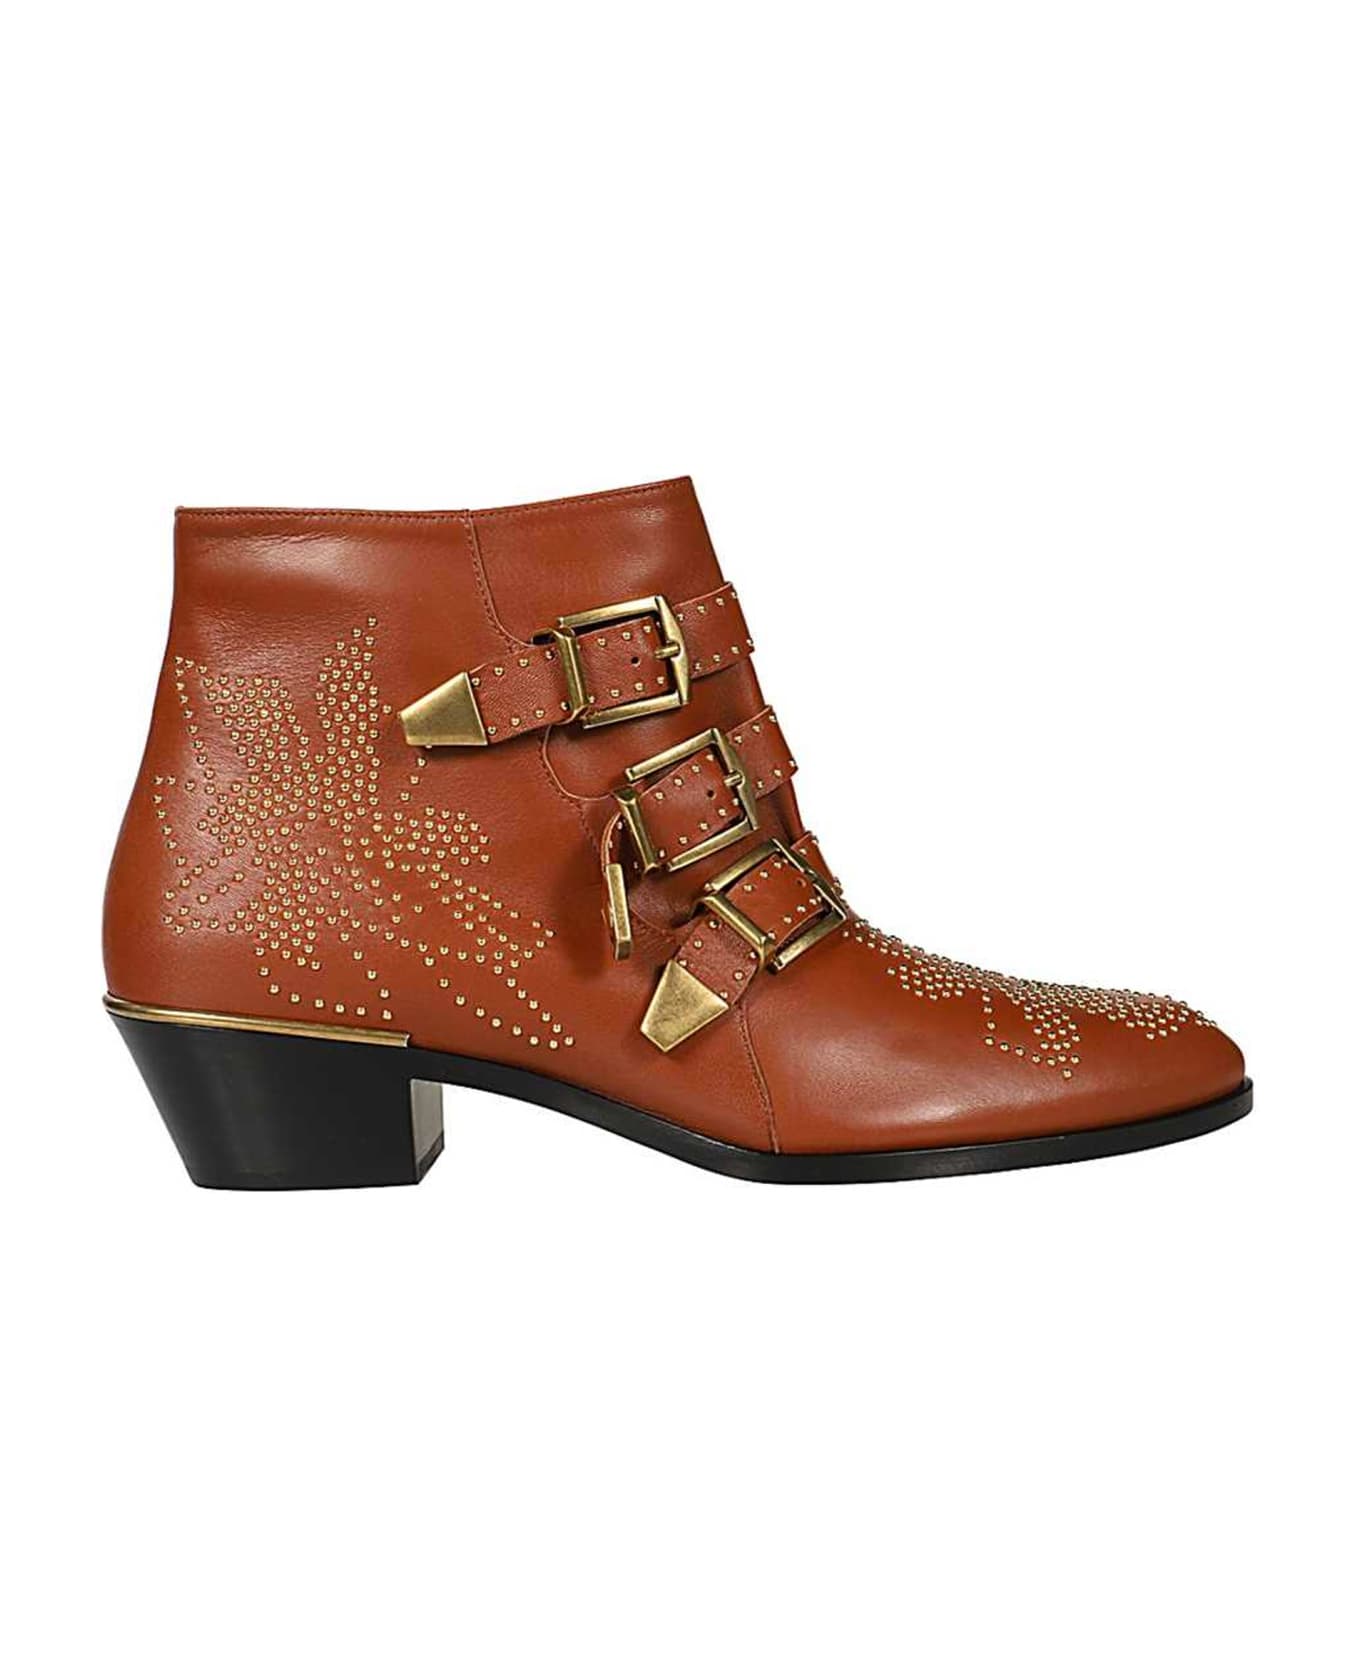 Chloé Leather Susanna Boots - Brown ブーツ